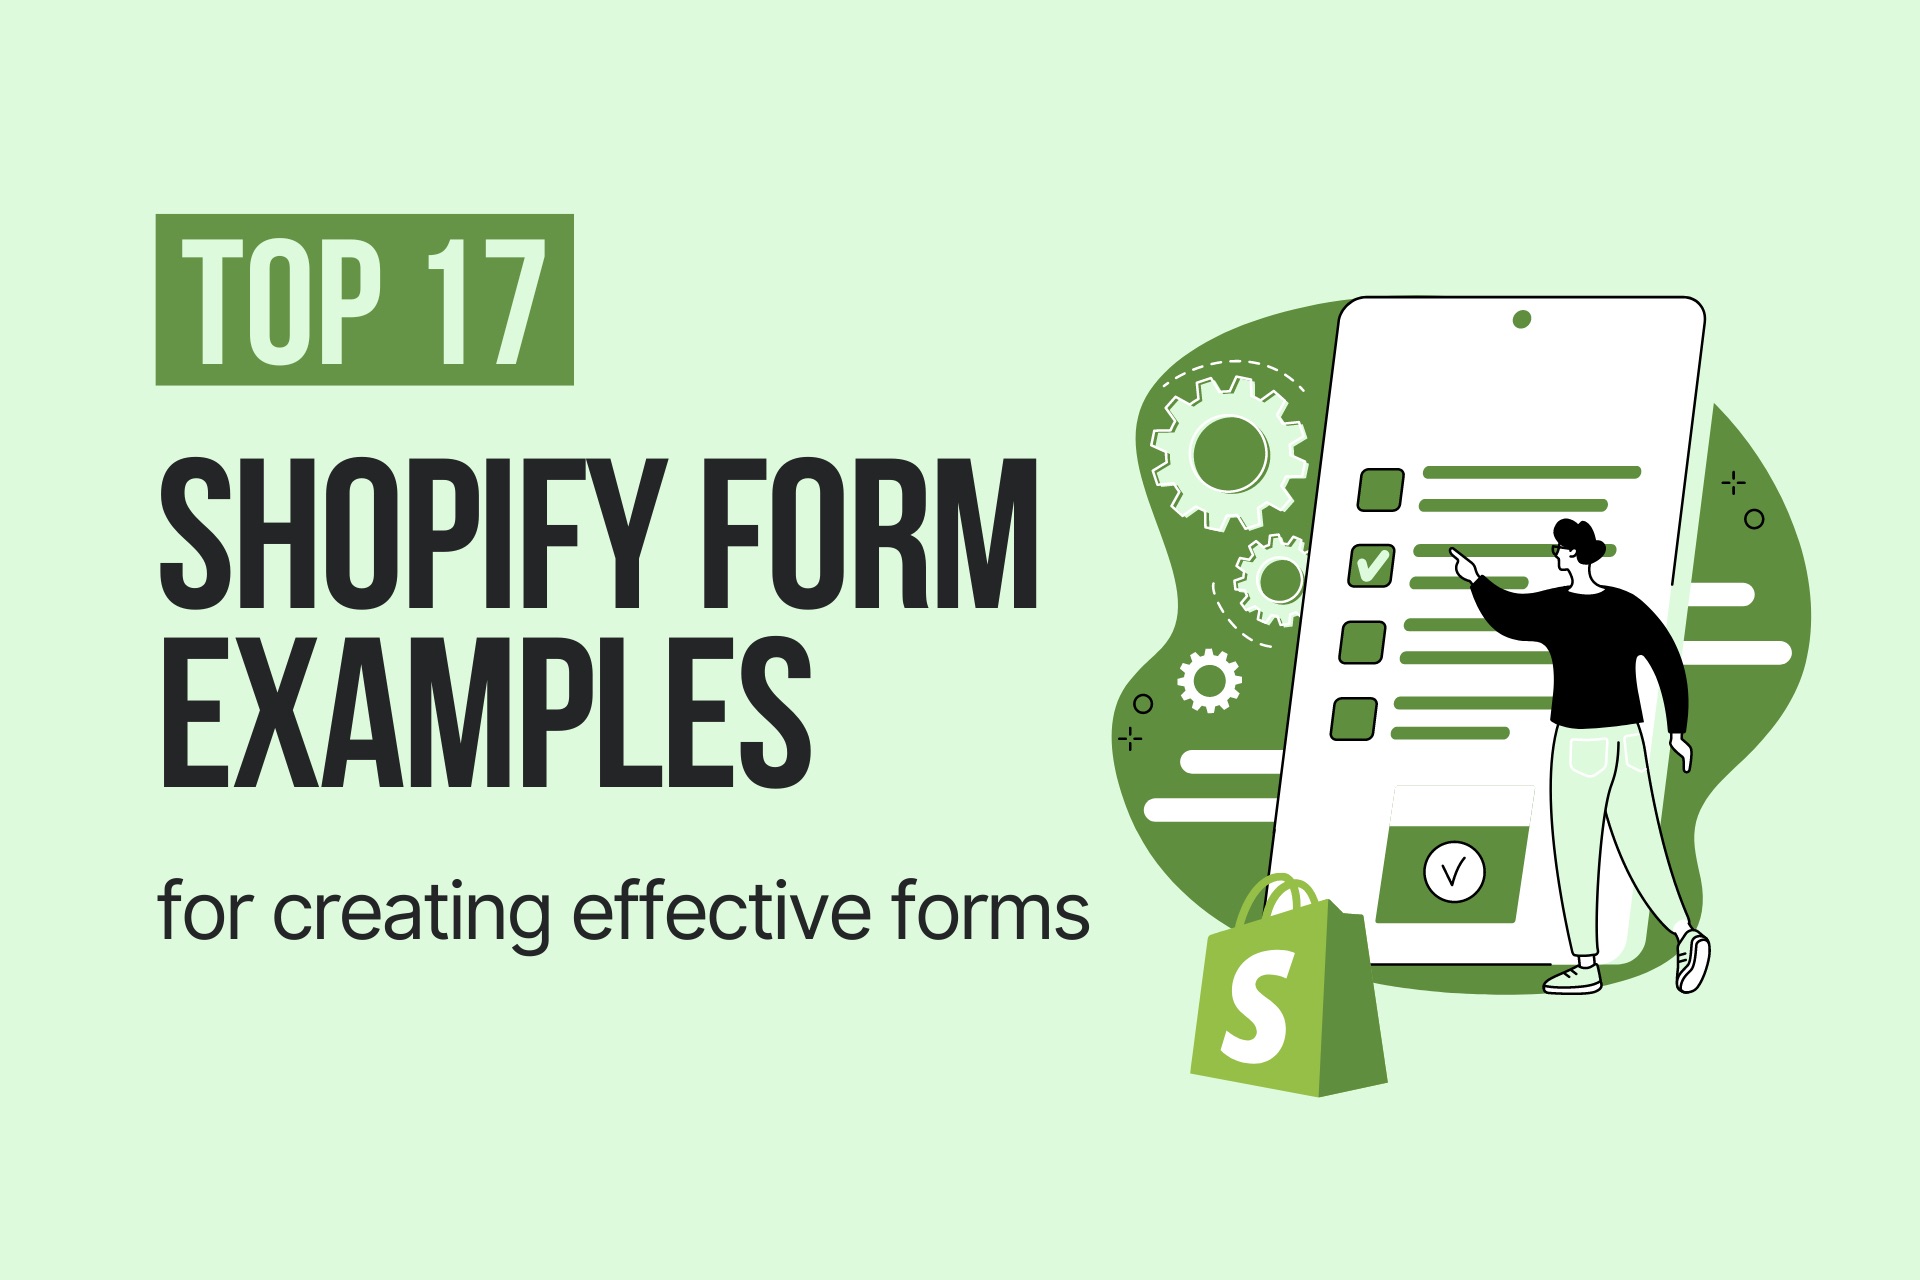 Top 17 Shopify Form Examples for Creating Effective Forms